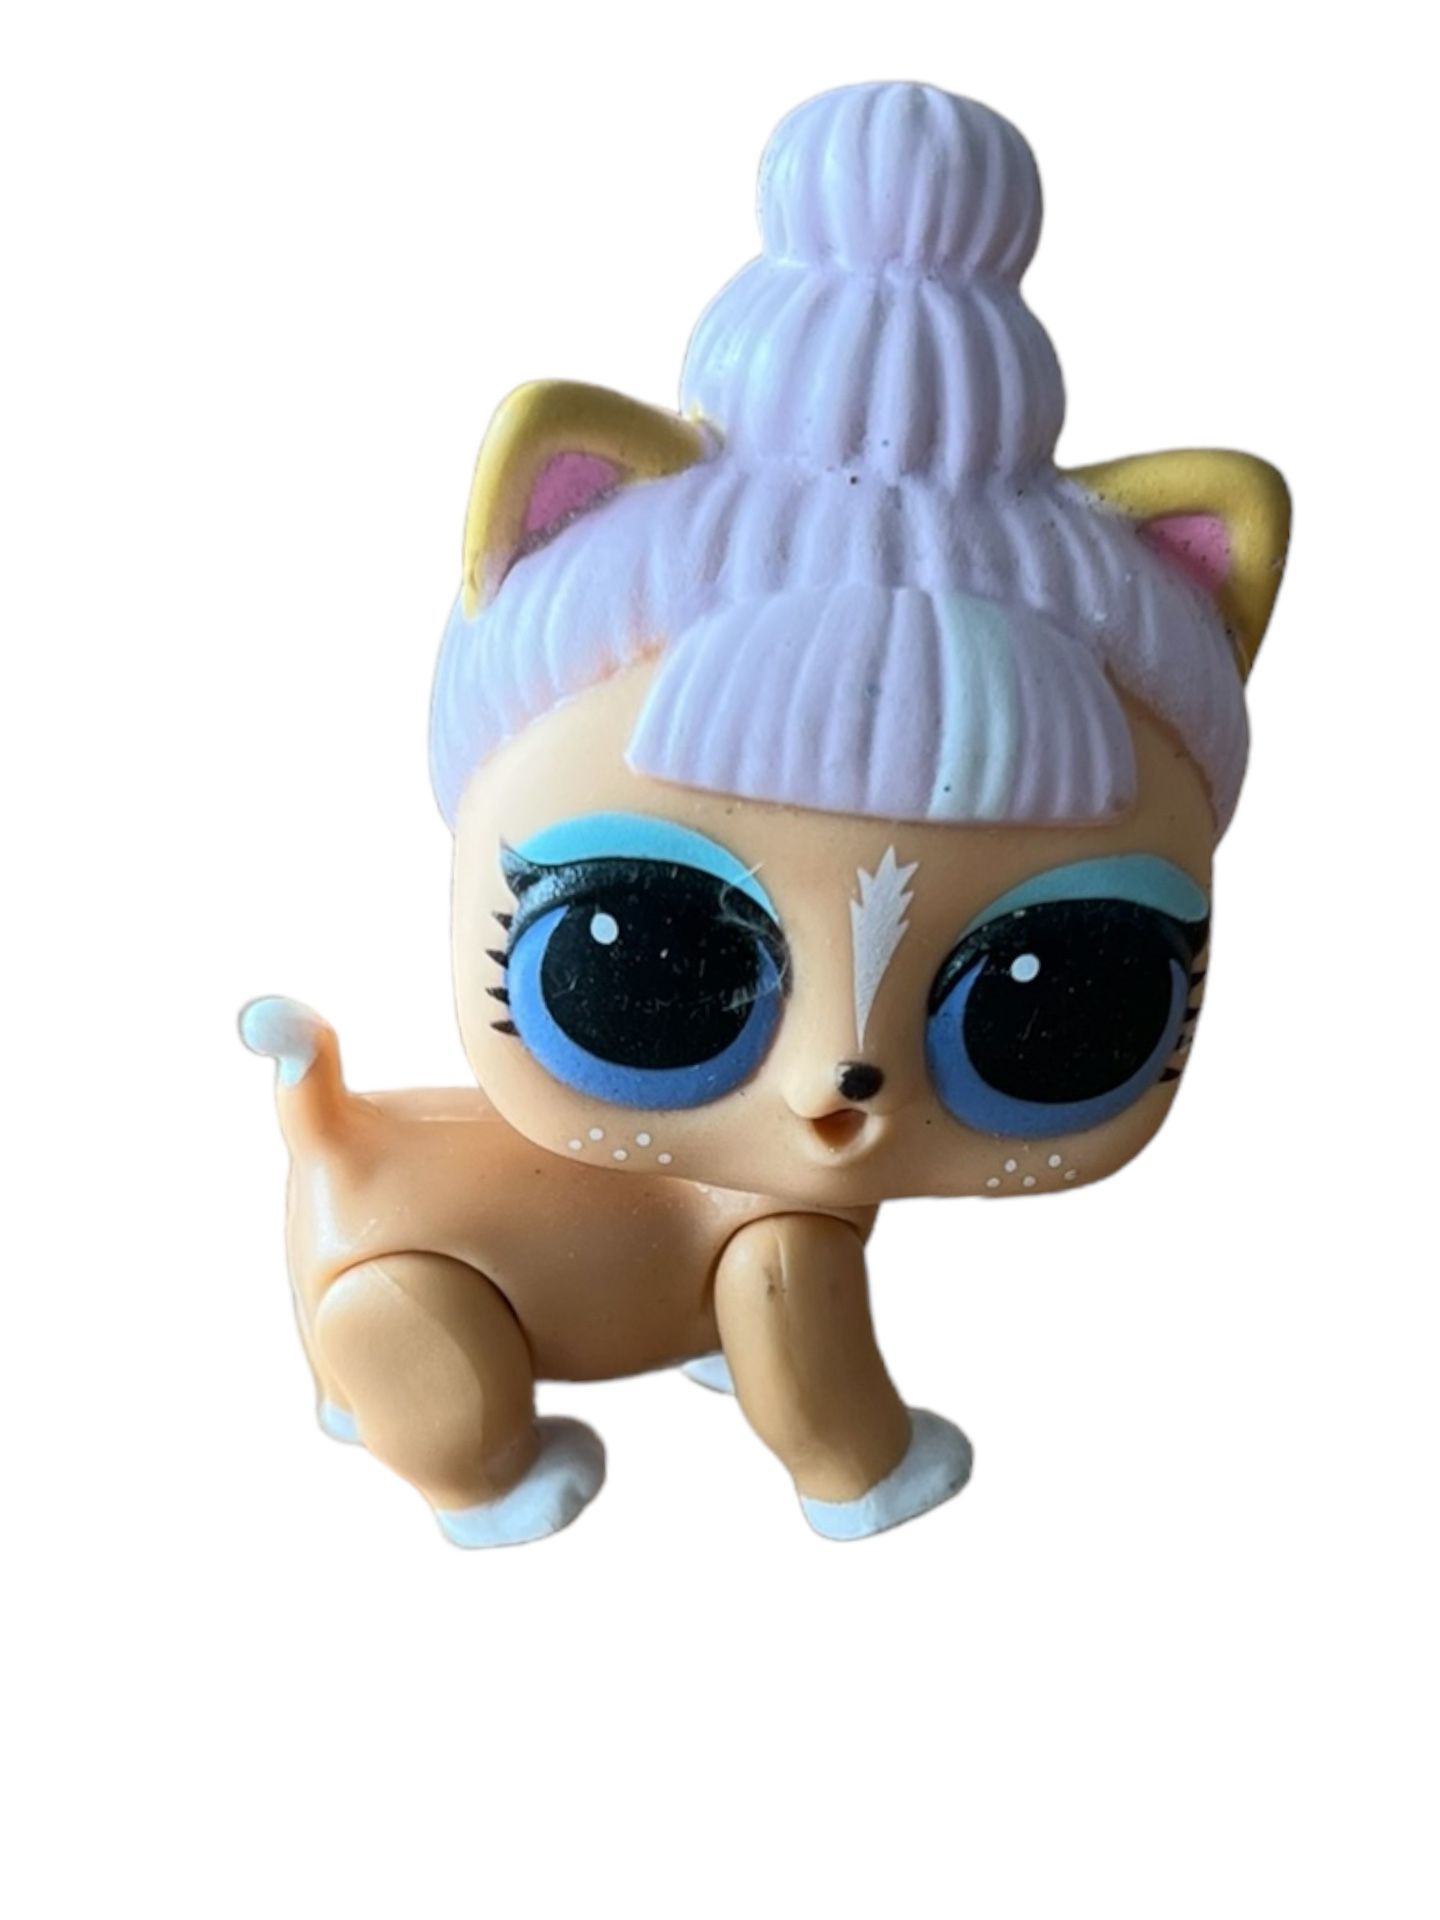 LOL Suprise Doll Toy Lola Up Town Lavender Hair Pet  This LOL Surprise Doll Toy, named Lola Up Town, comes with lavender hair and a cute pet. It is a 